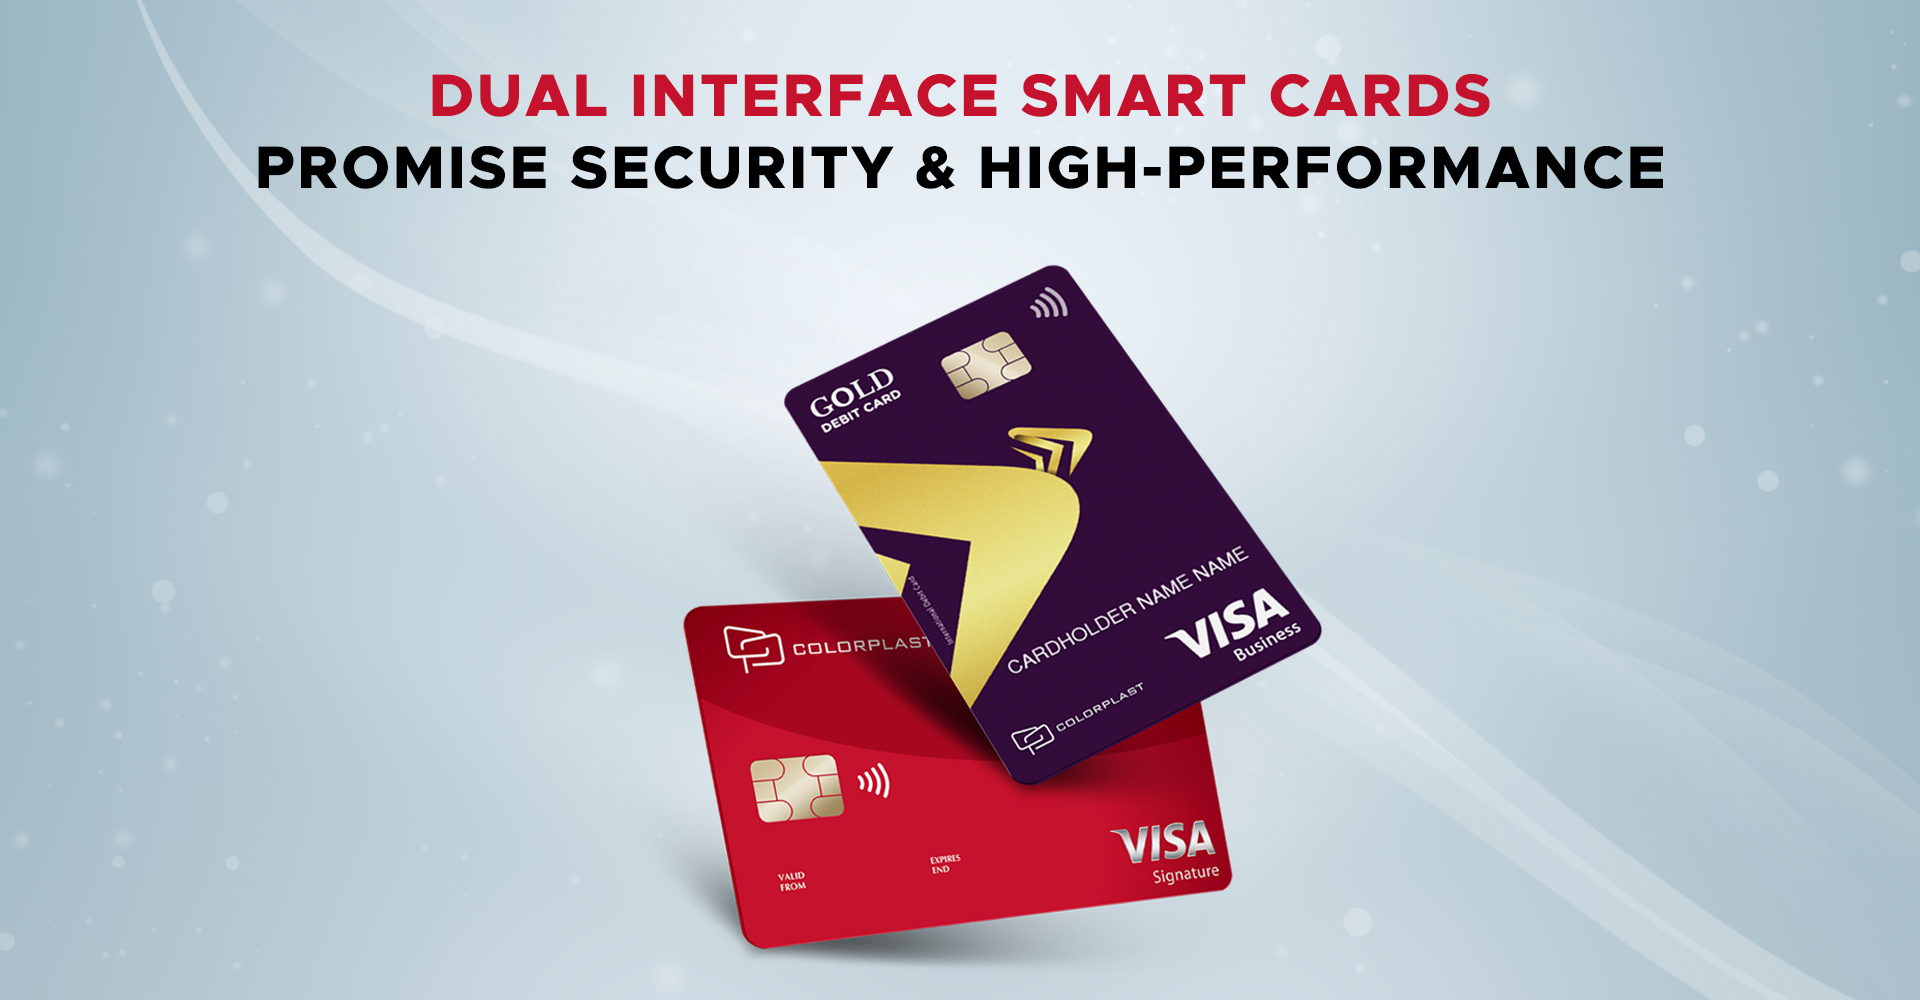 Dual interface smart cards promise security and high performance